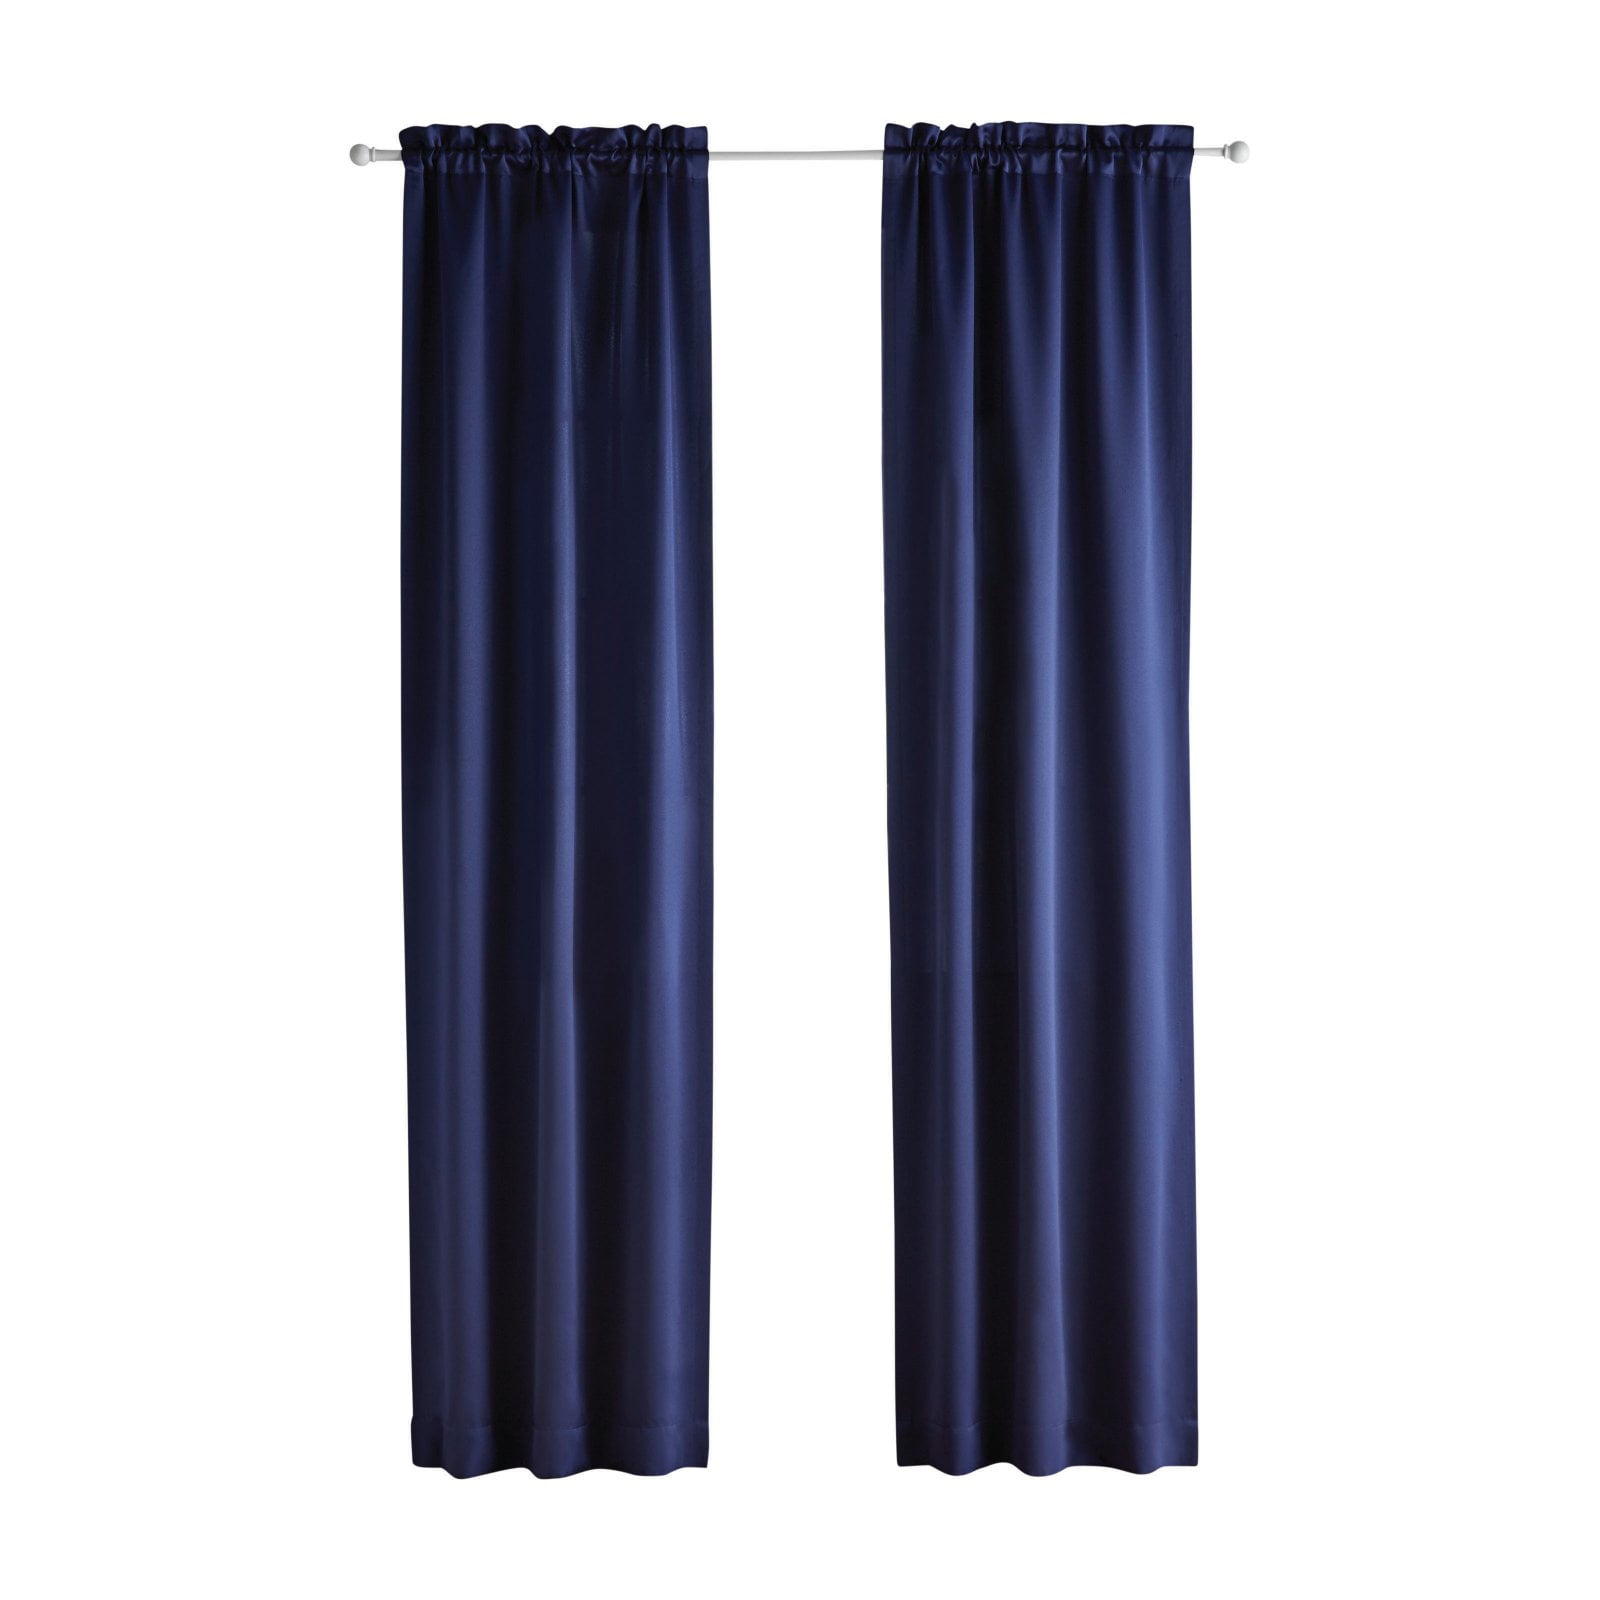 Your Zone Solid Color Room Darkening Rod Pocket Curtain Panel Pair, Set of 2, Blue, 30 x 84